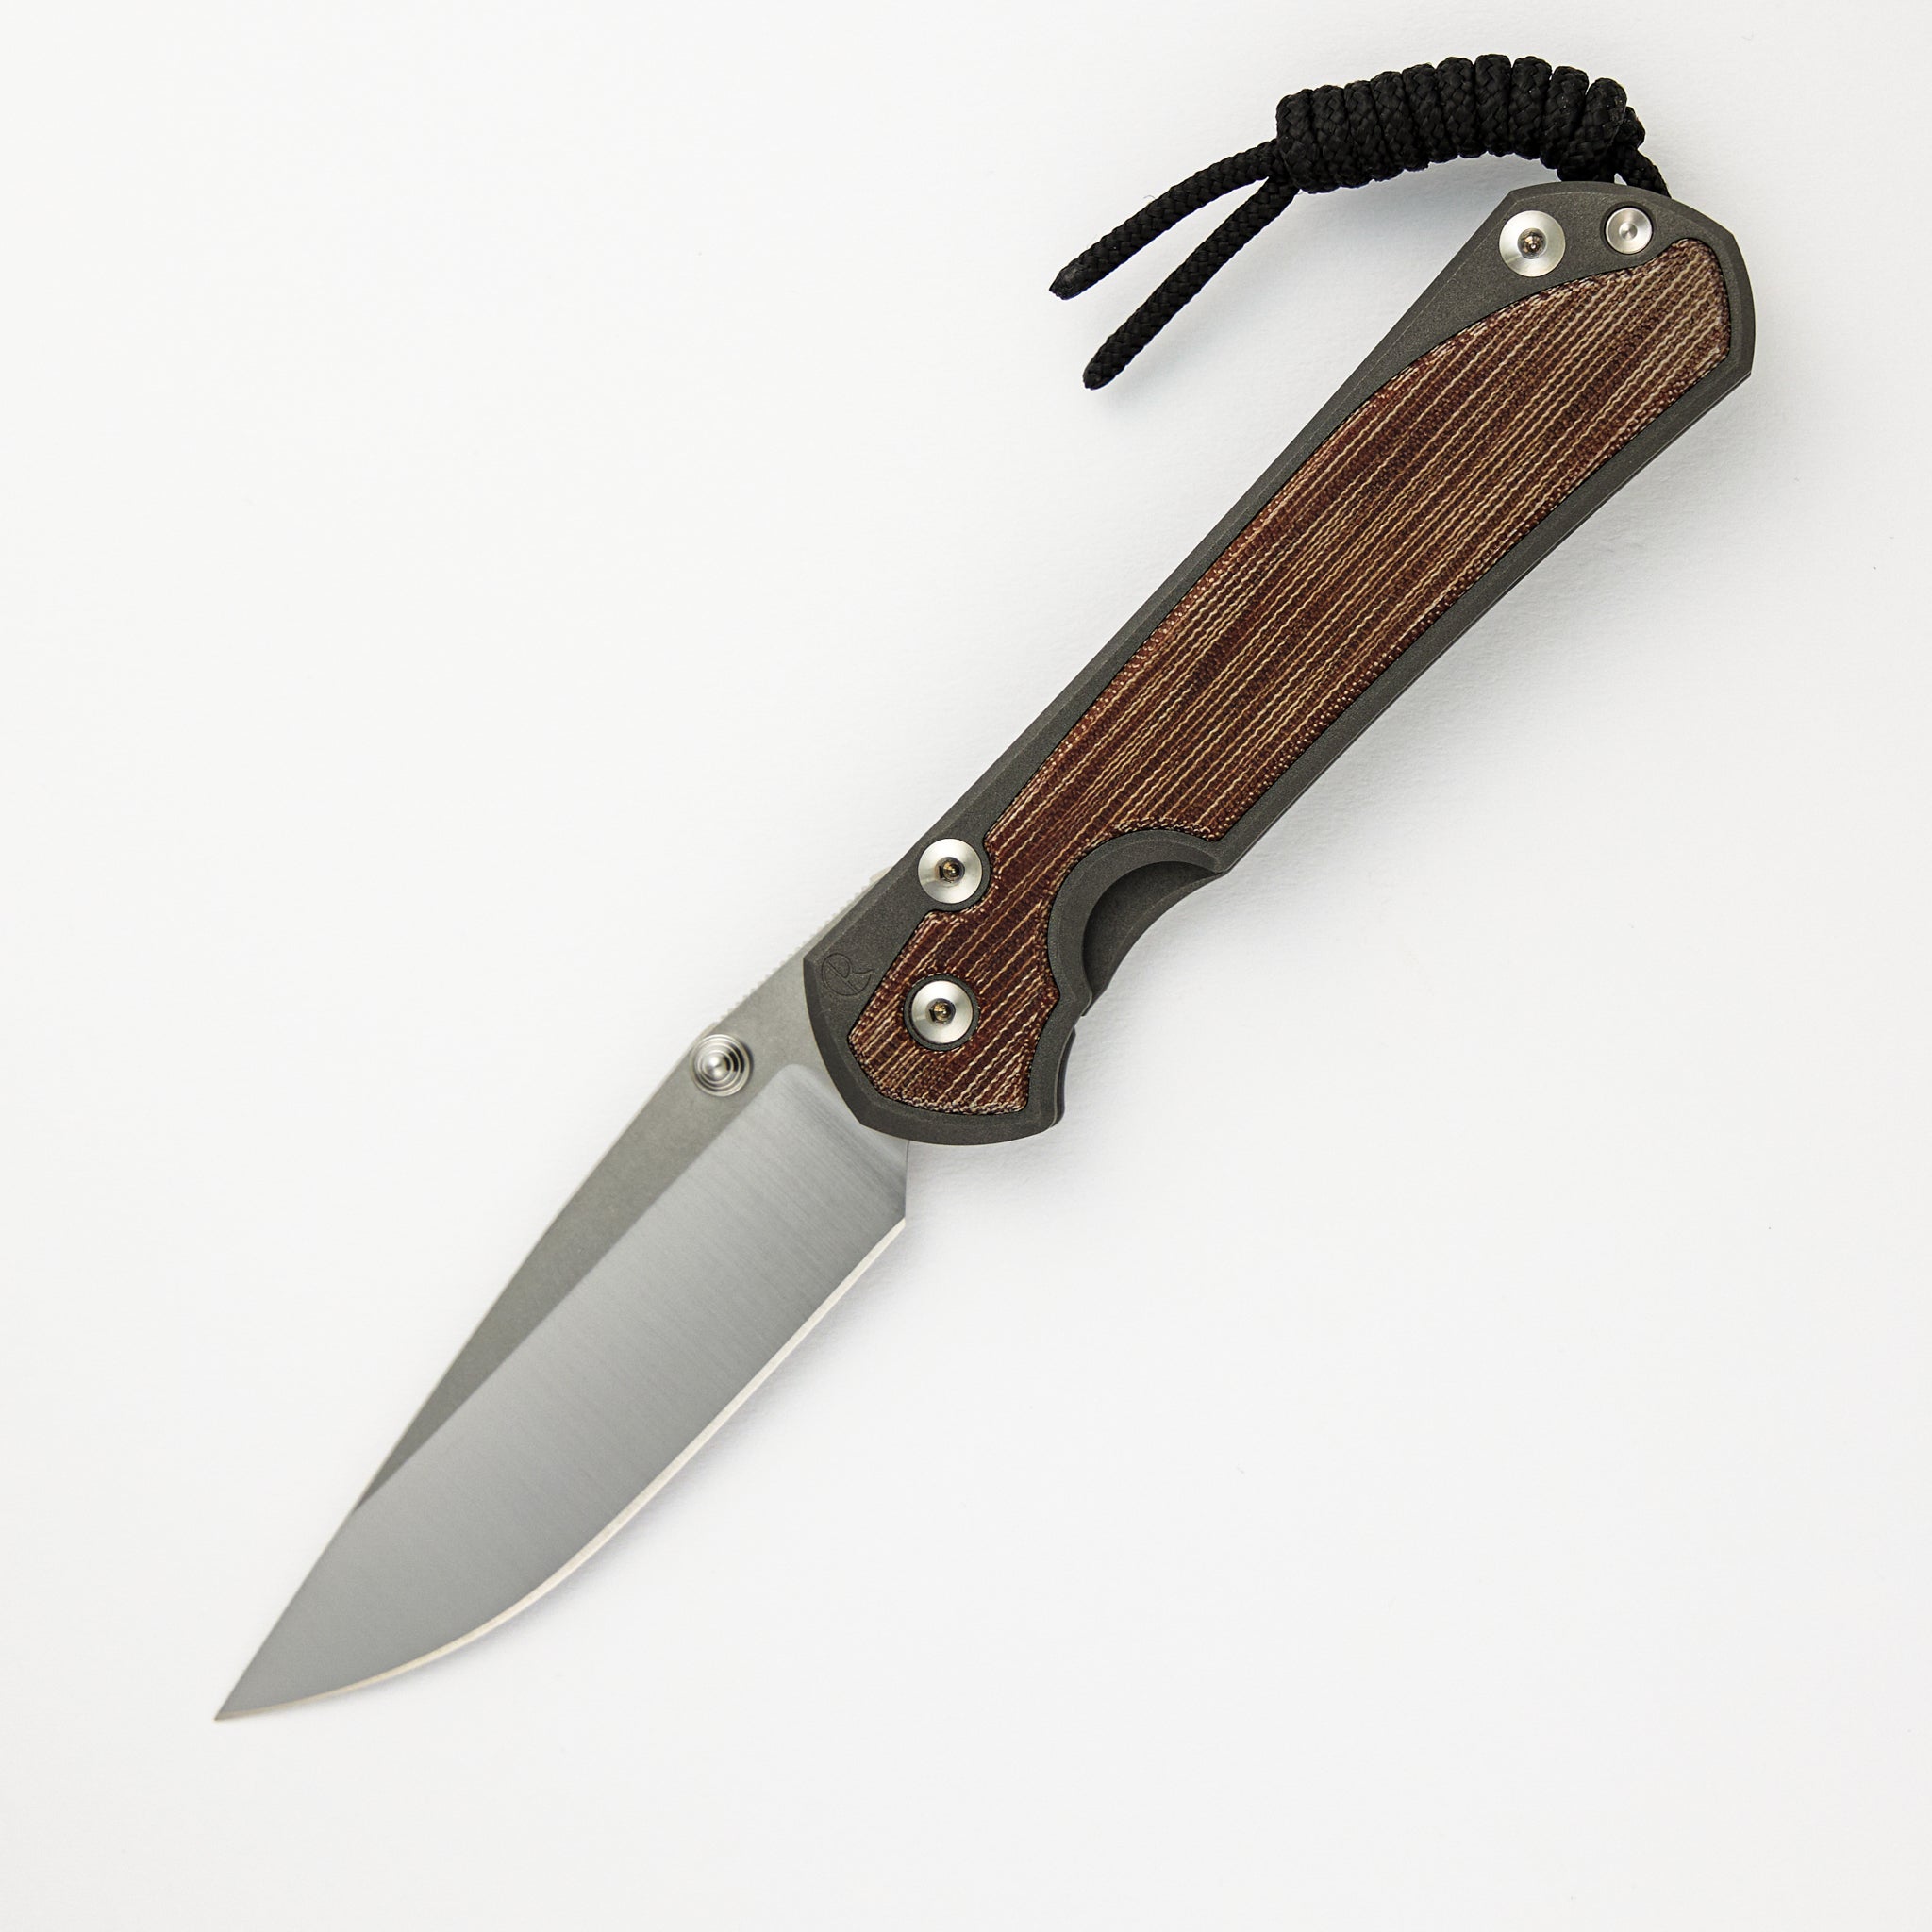 CHRIS REEVE LARGE SEBENZA 31 NATURAL CANVAS MICARTA INLAY – POLISHED CPM MAGNACUT BLADE – SILVER DOUBLE THUMB LUGS